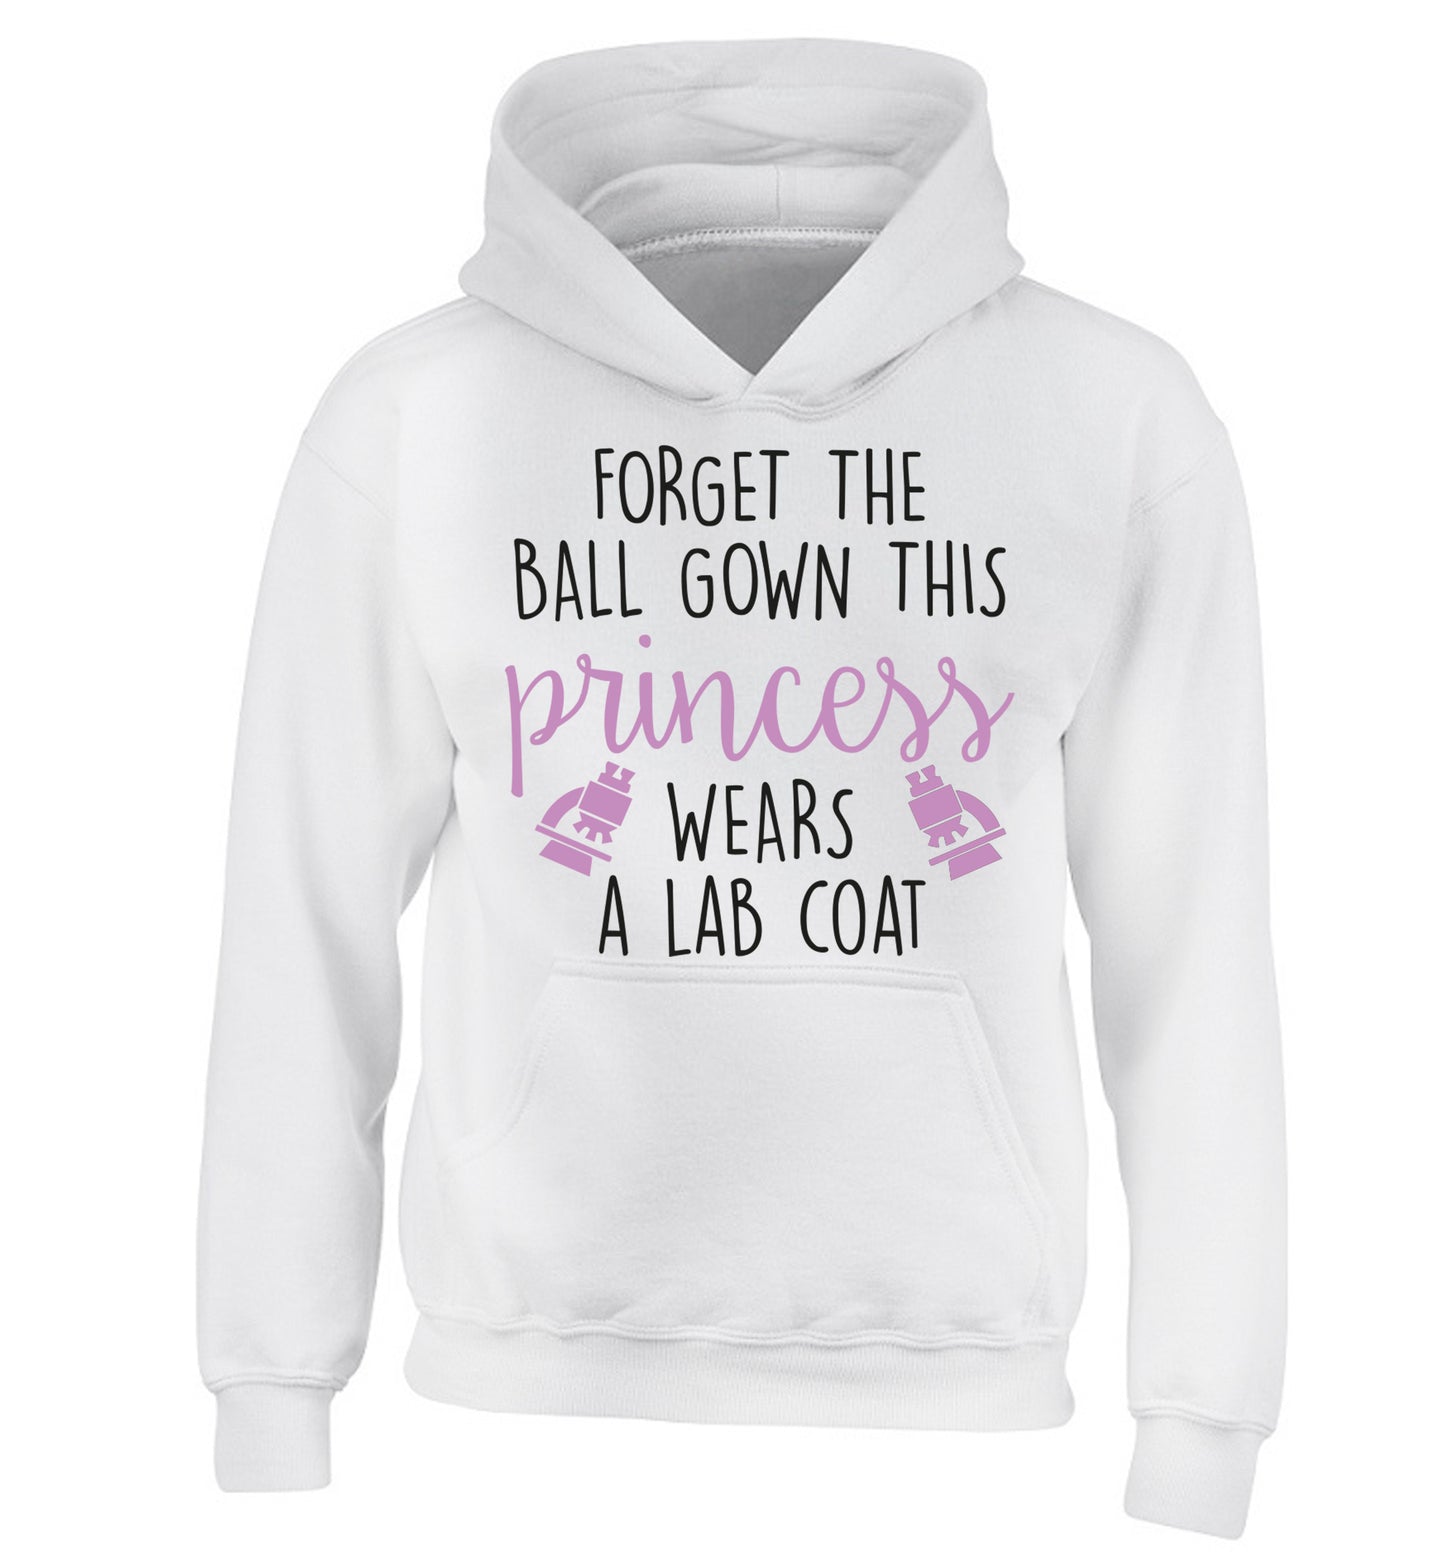 Forget the ball gown this princess wears a lab coat children's white hoodie 12-14 Years